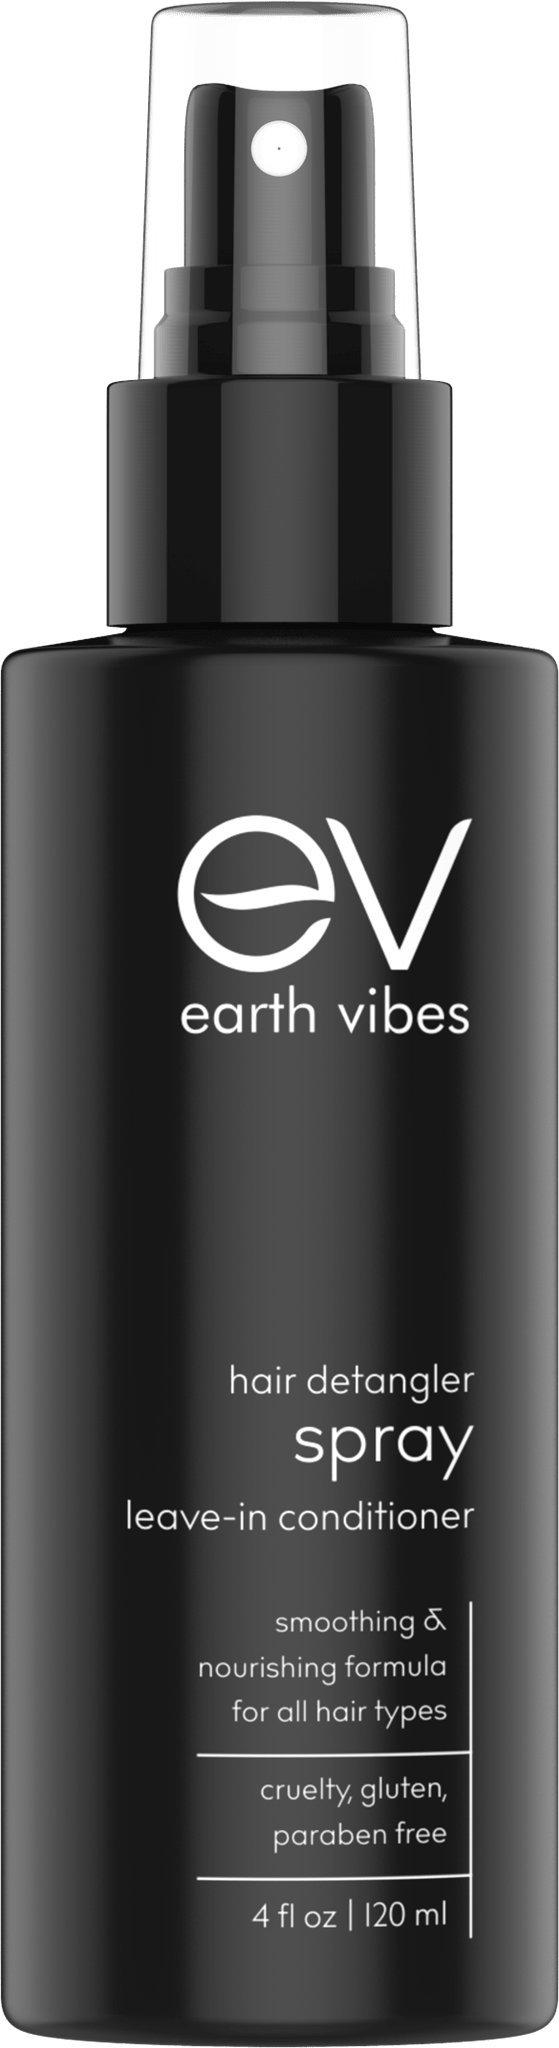 Earth Vibes Natural Hair Detangler, Leave-in Conditioner Spray, Detangler for Kids & Adults - All Hair Types - Color Safe Cruelty, Sulfate - Paraben Free - Made With Organic Jojoba and Avocado Oil